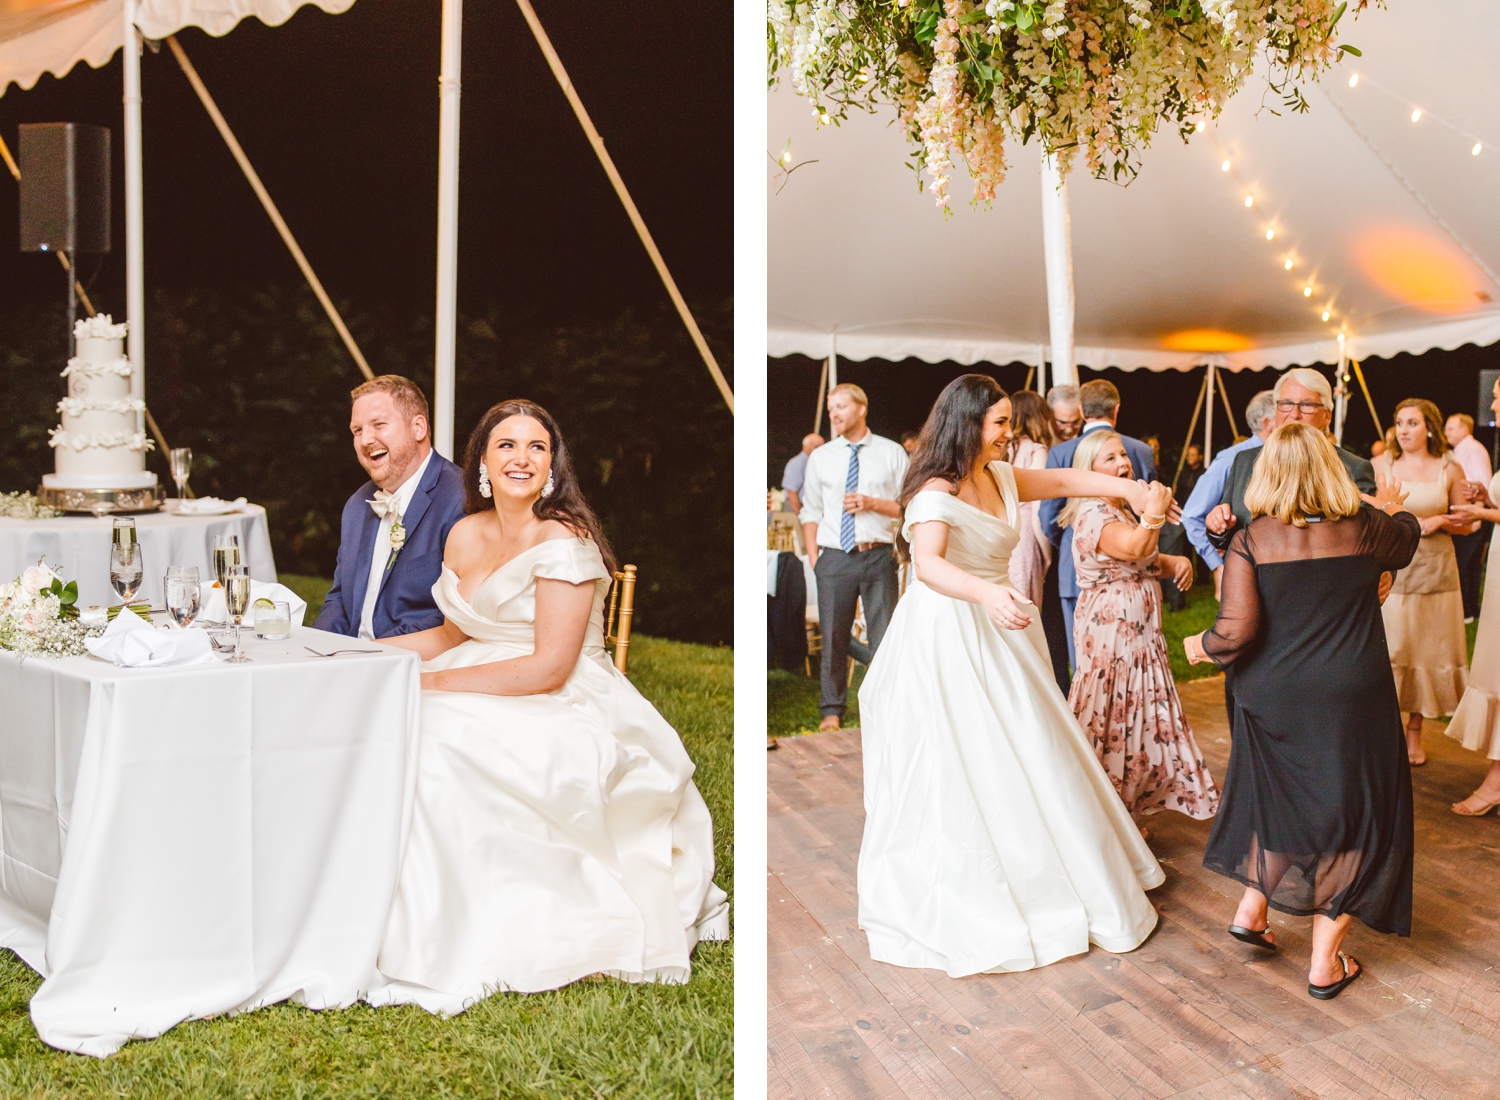 Bride and groom laughing during reception at Ladew Topiary Garden wedding | bride dancing with wedding guests | Brooke Michelle Photo